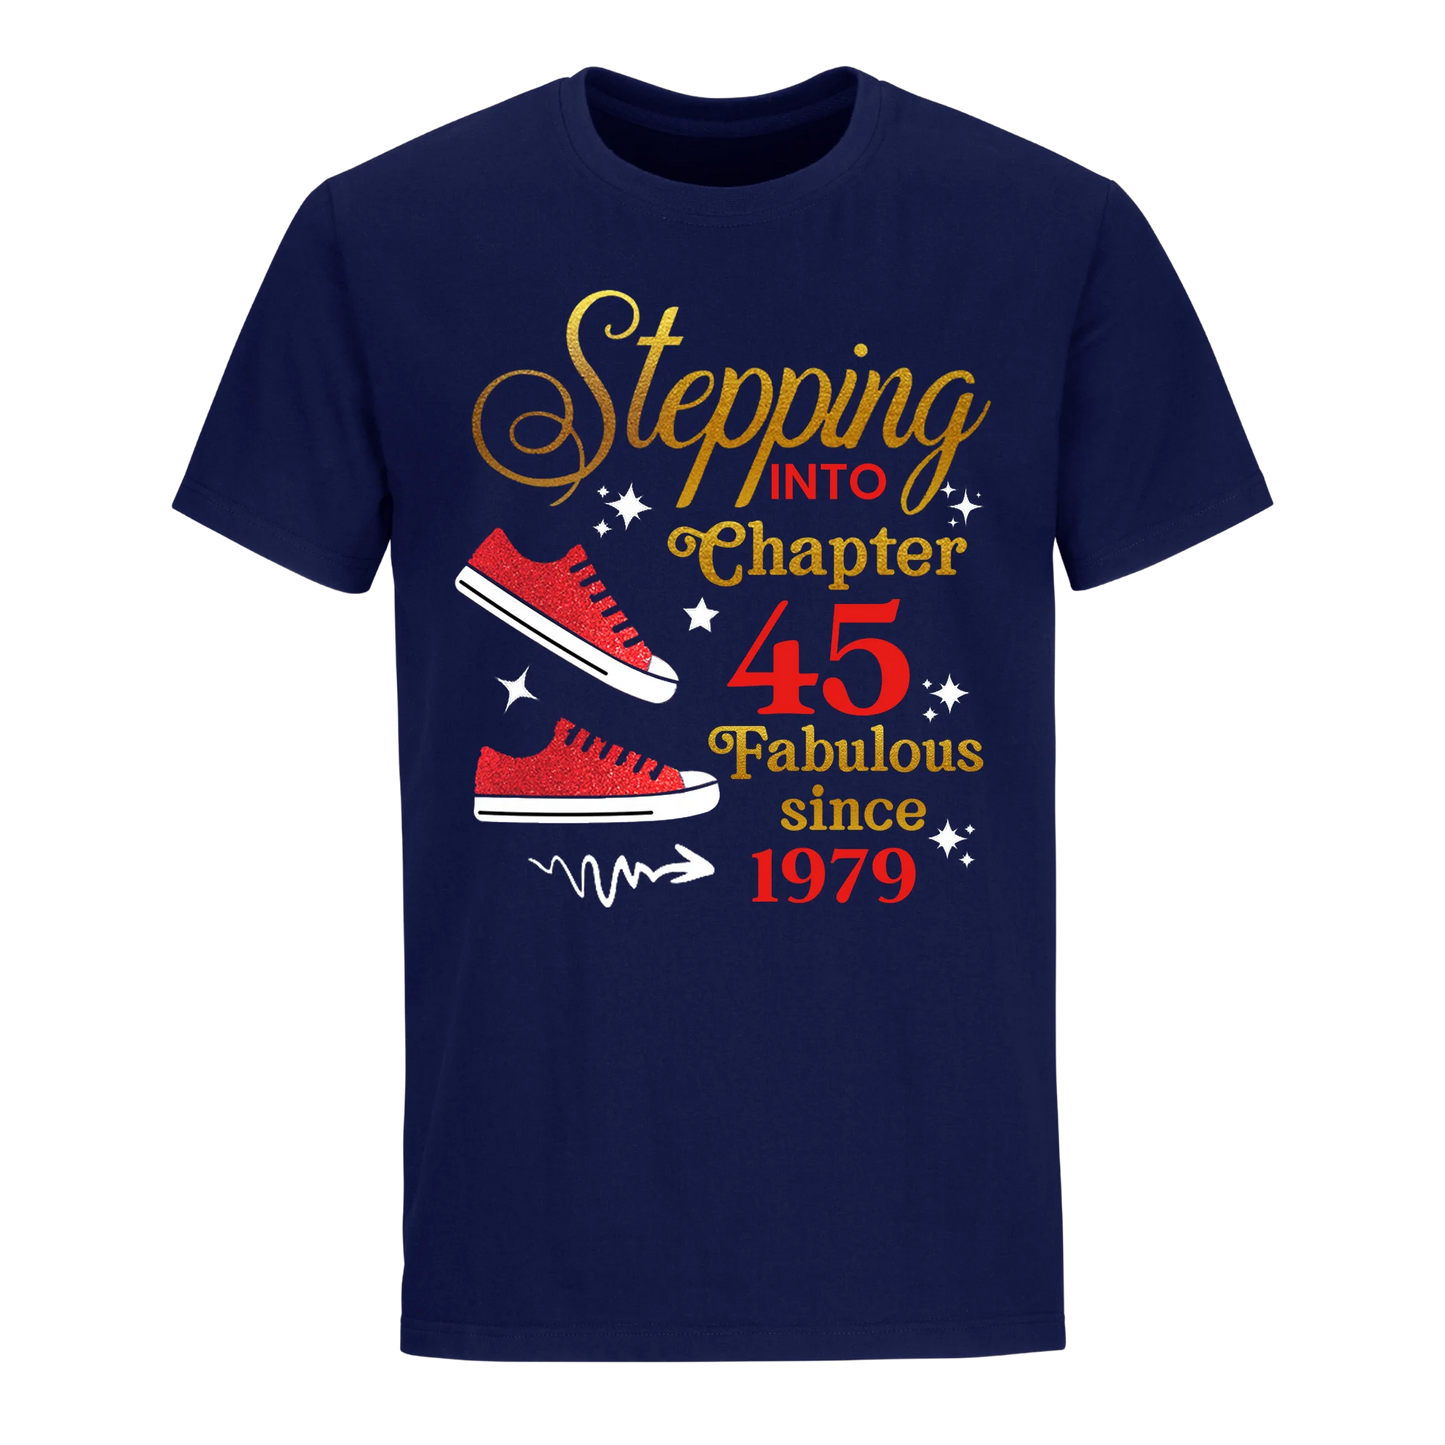 STEPPING CHAPTER 45TH FAB SINCE 1979 UNISEX SHIRT